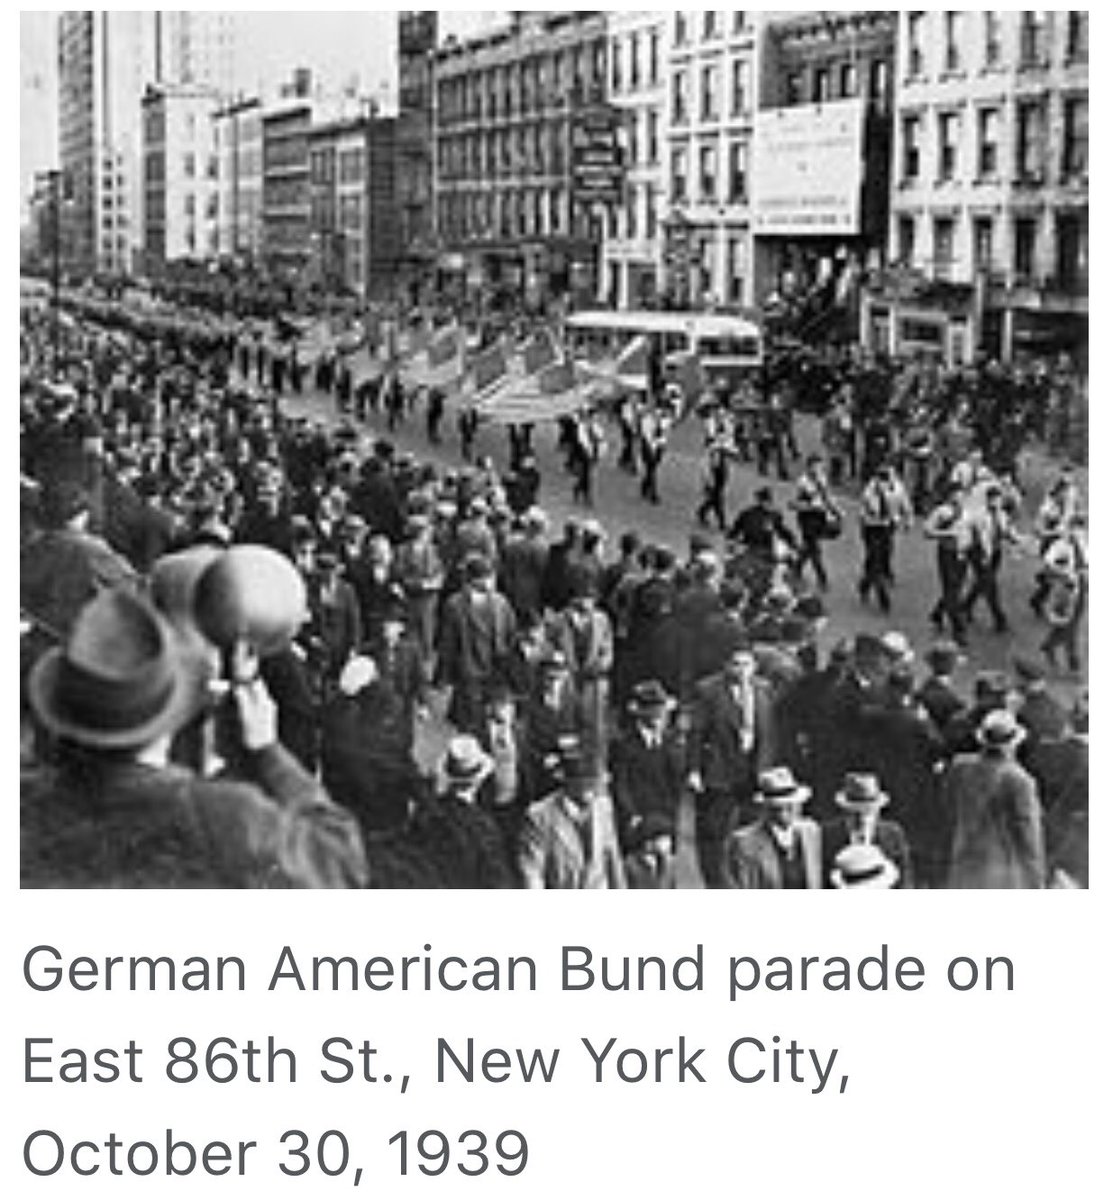 The Bund declared George Washington “the first Fascist”They claimed those who weren’t Christian were non-Aryan & inferior, were vehemently antisemitic, anti-Democrat & mocked president FDR.They held parades & swastika rallies shouting “heil Hitler”& ”America First” at rallies